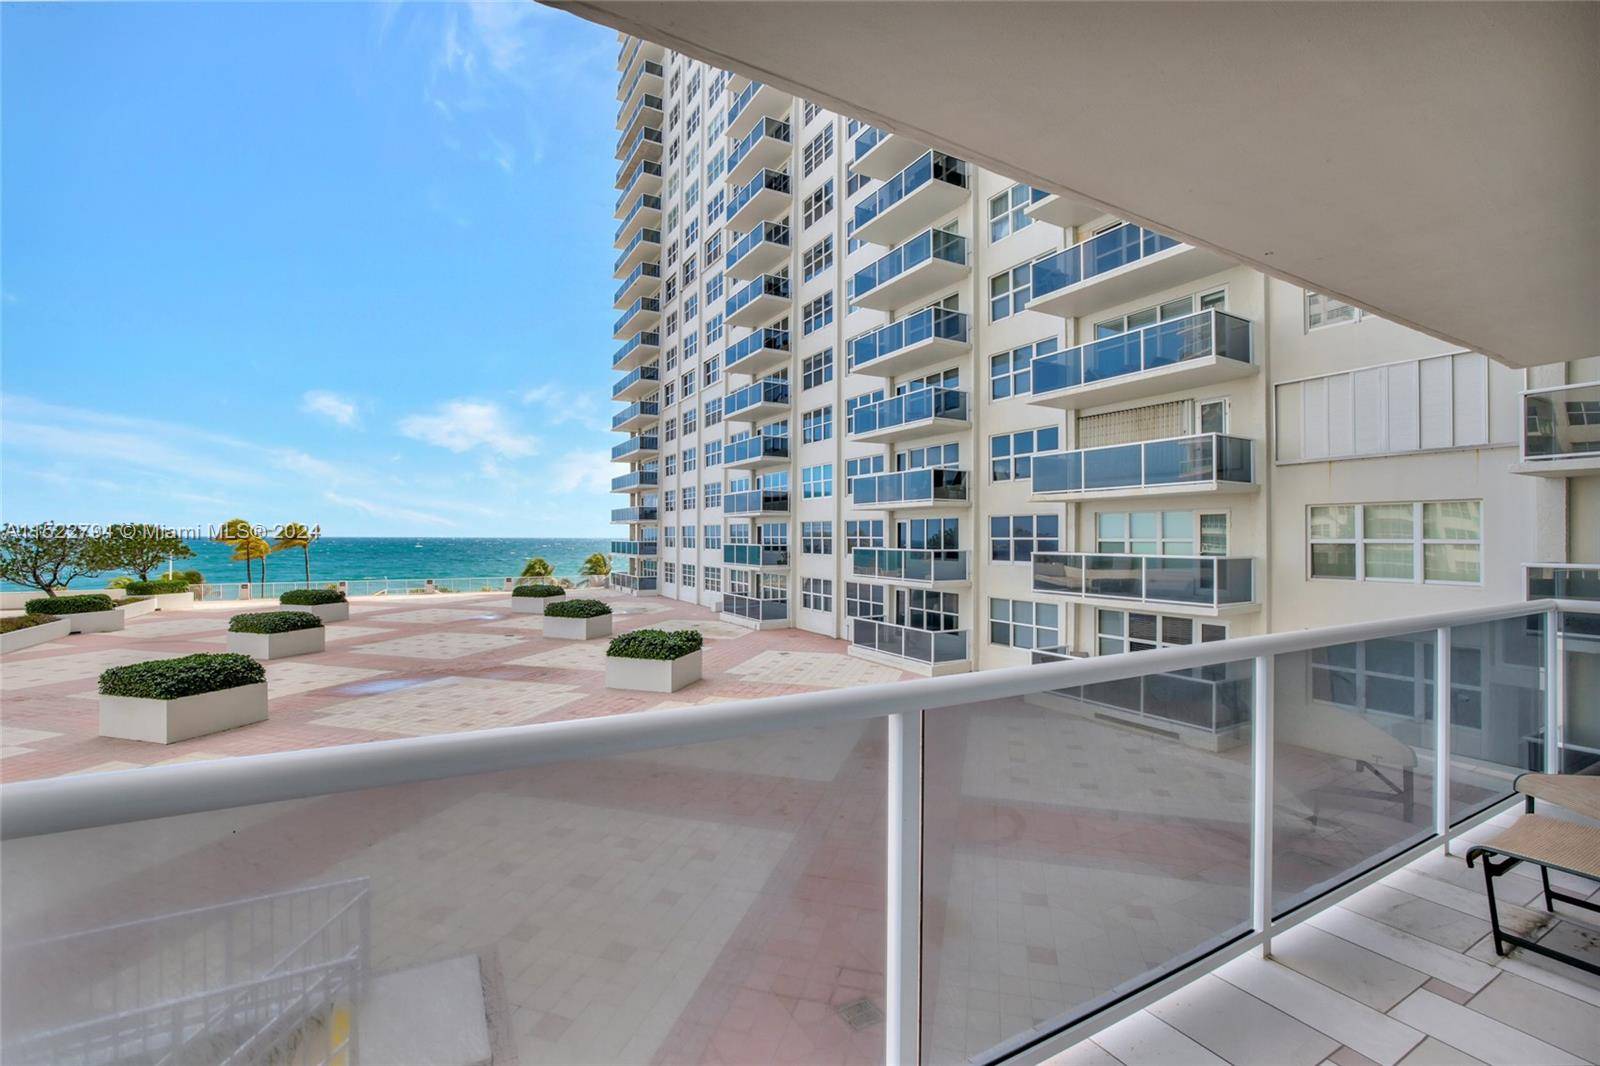 Step into a slice of paradise with this stunning 2 bedroom, 2 bath condo nestled on the pristine sands of Fort Lauderdale Beach.